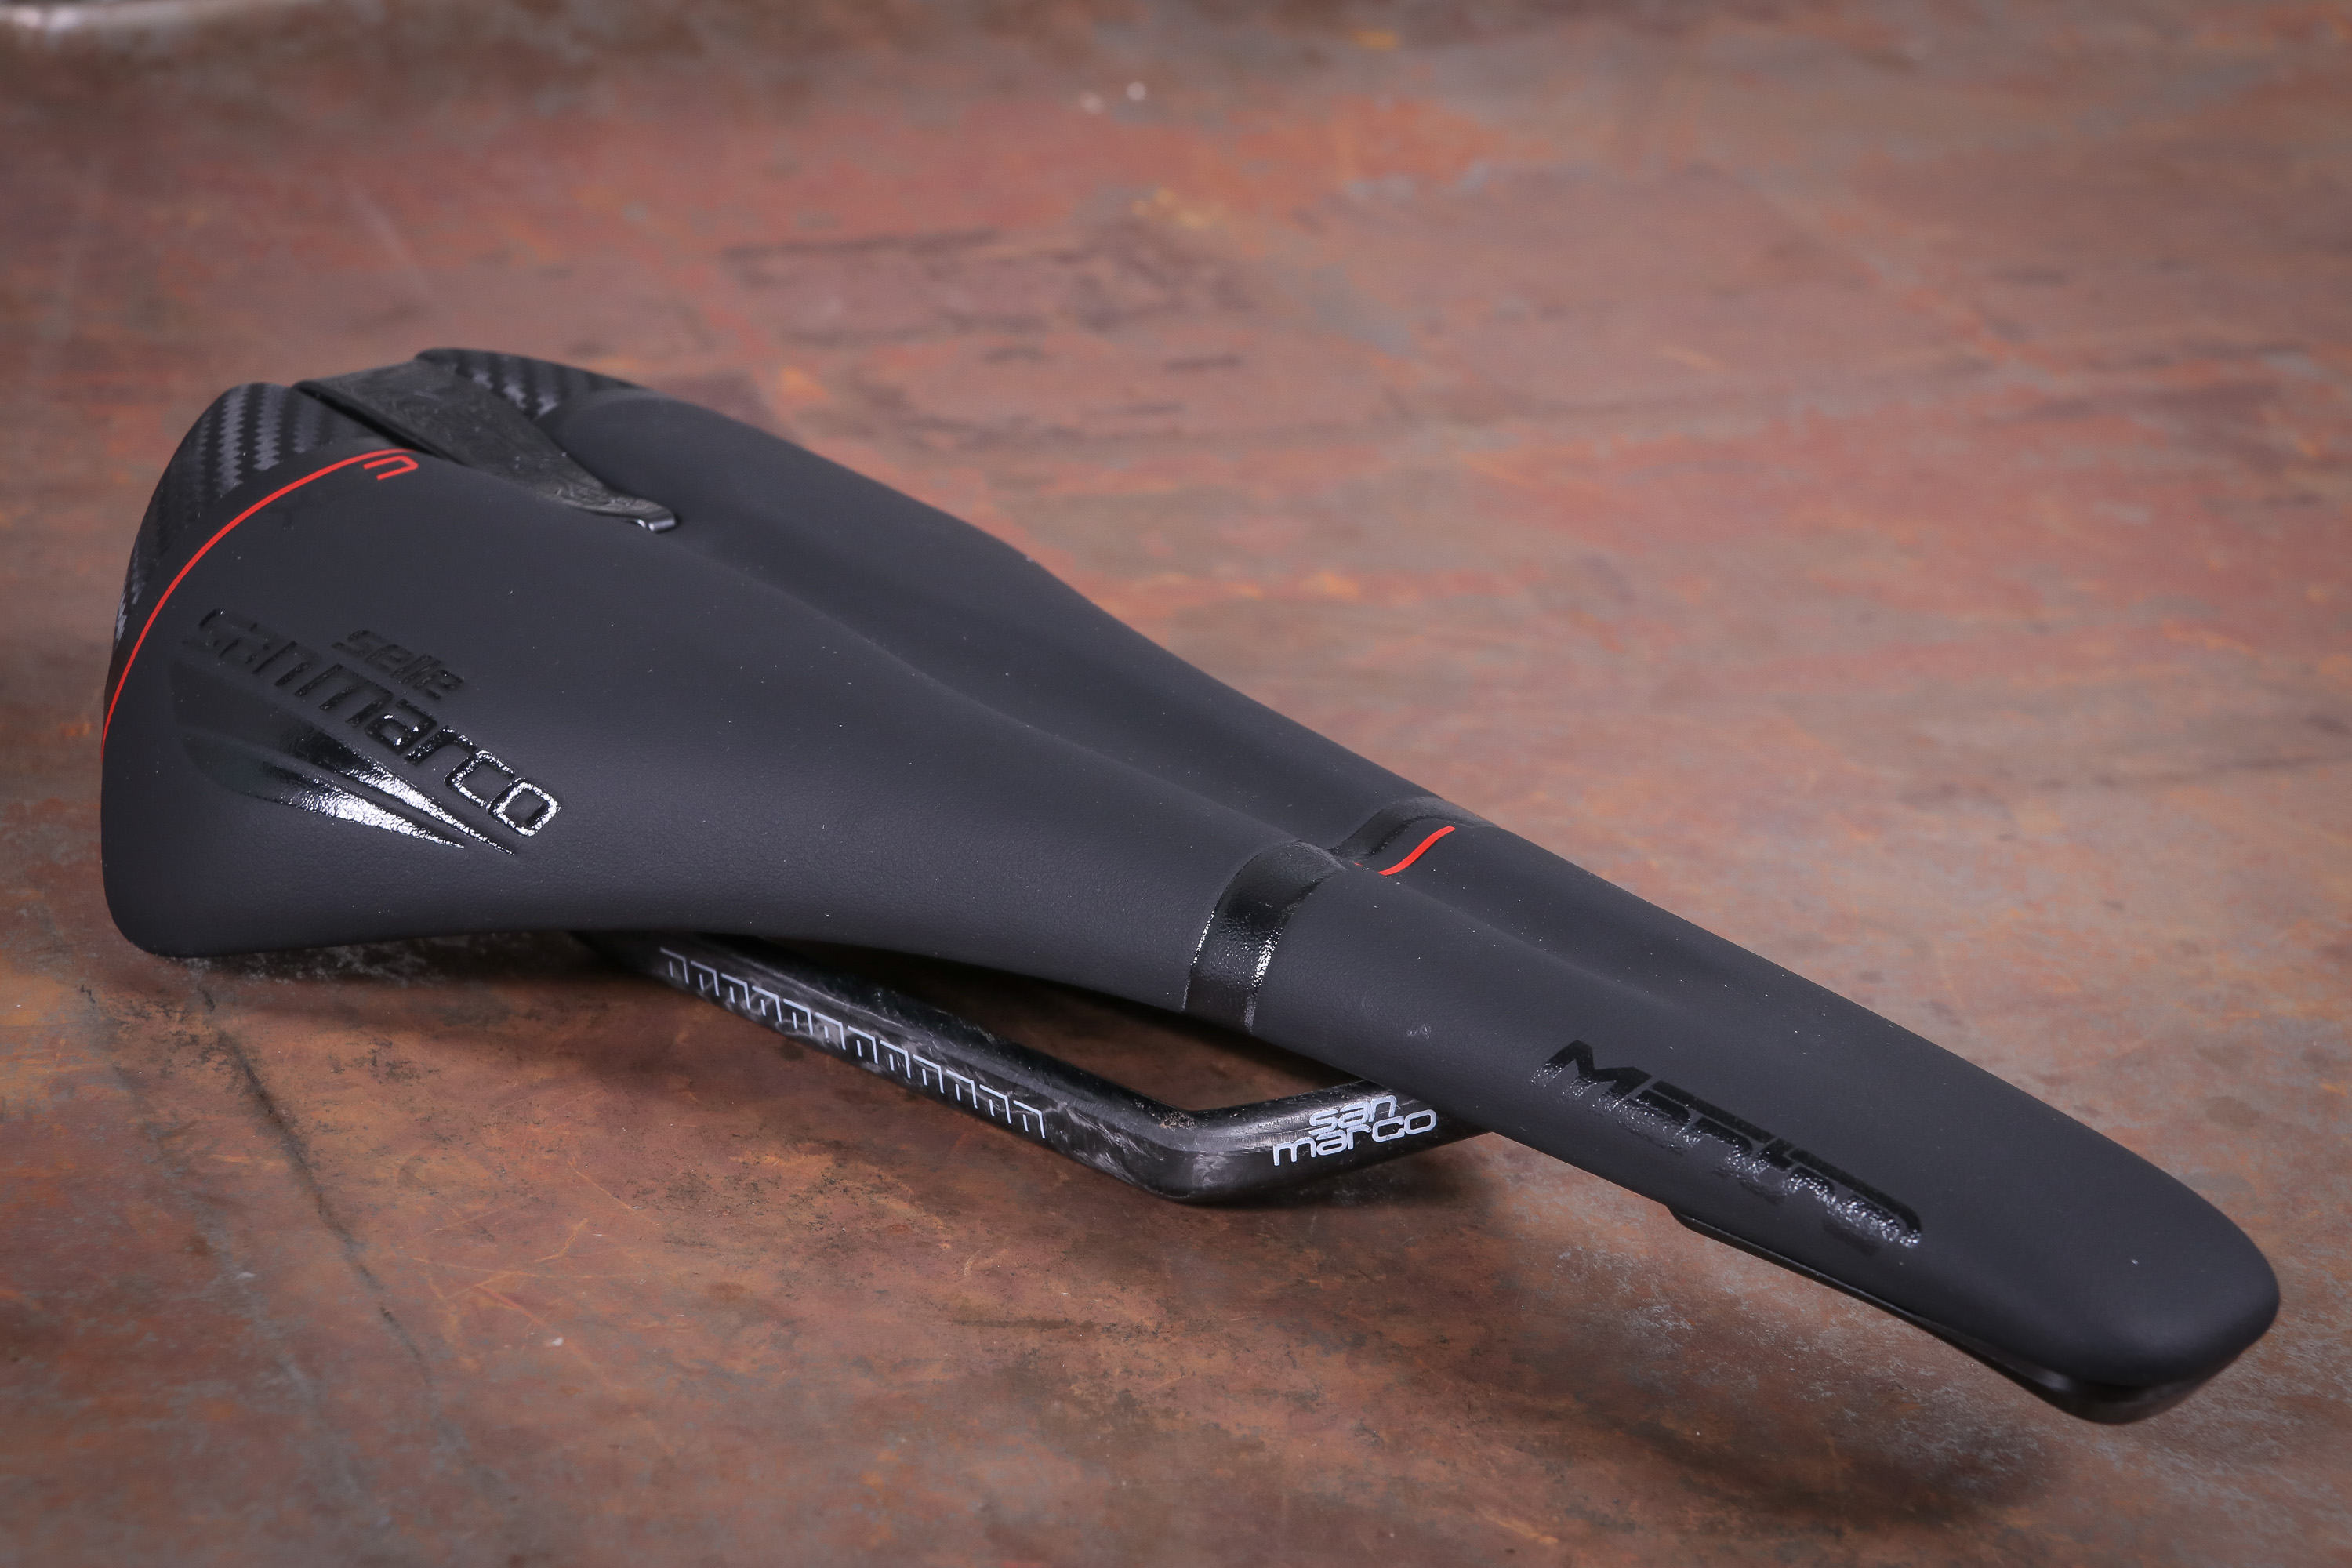 Selle San Marco Mantra Carbon FX Bicycle Saddle Wide Black